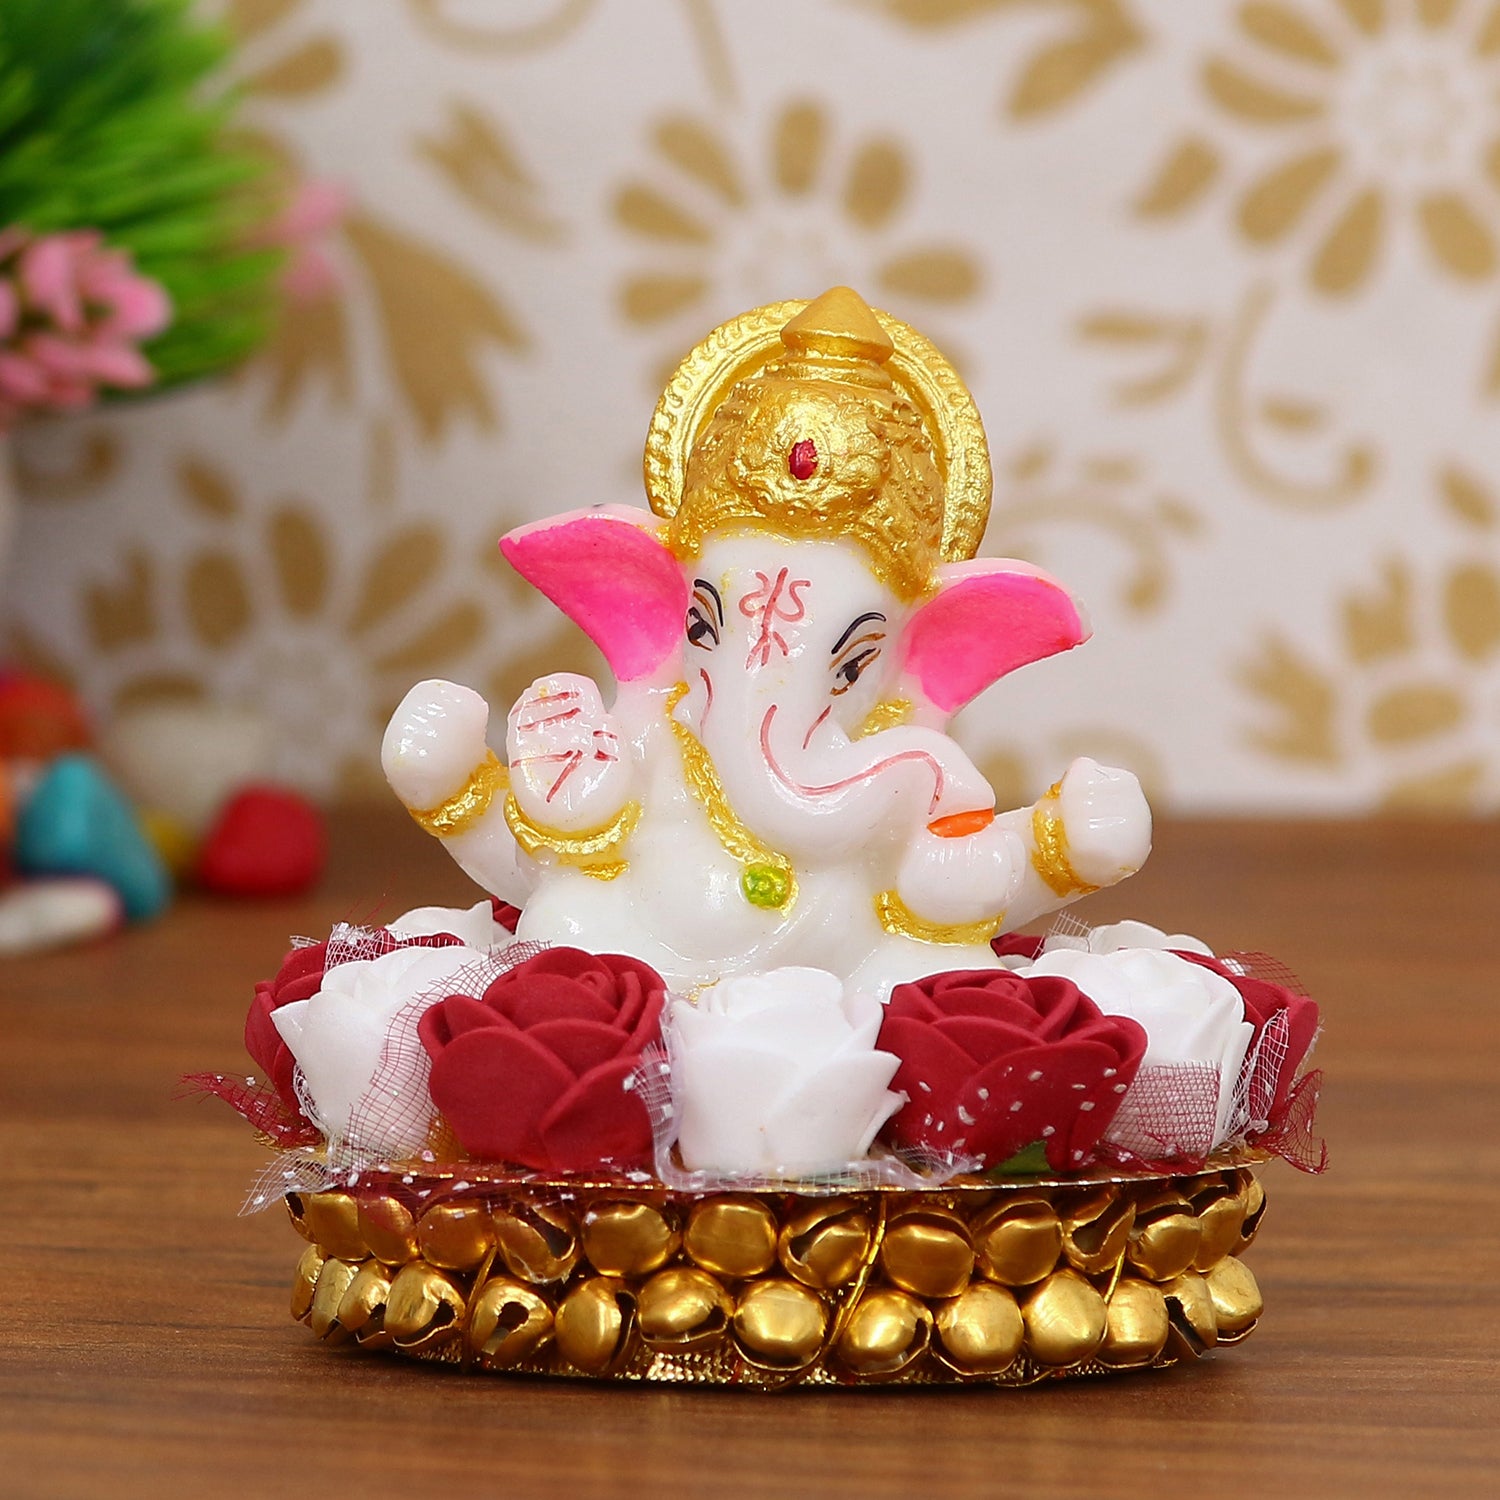 Golden and White Polyresin Lord Ganesha Idol on Decorative Handcrafted Plate with Red and White Flowers